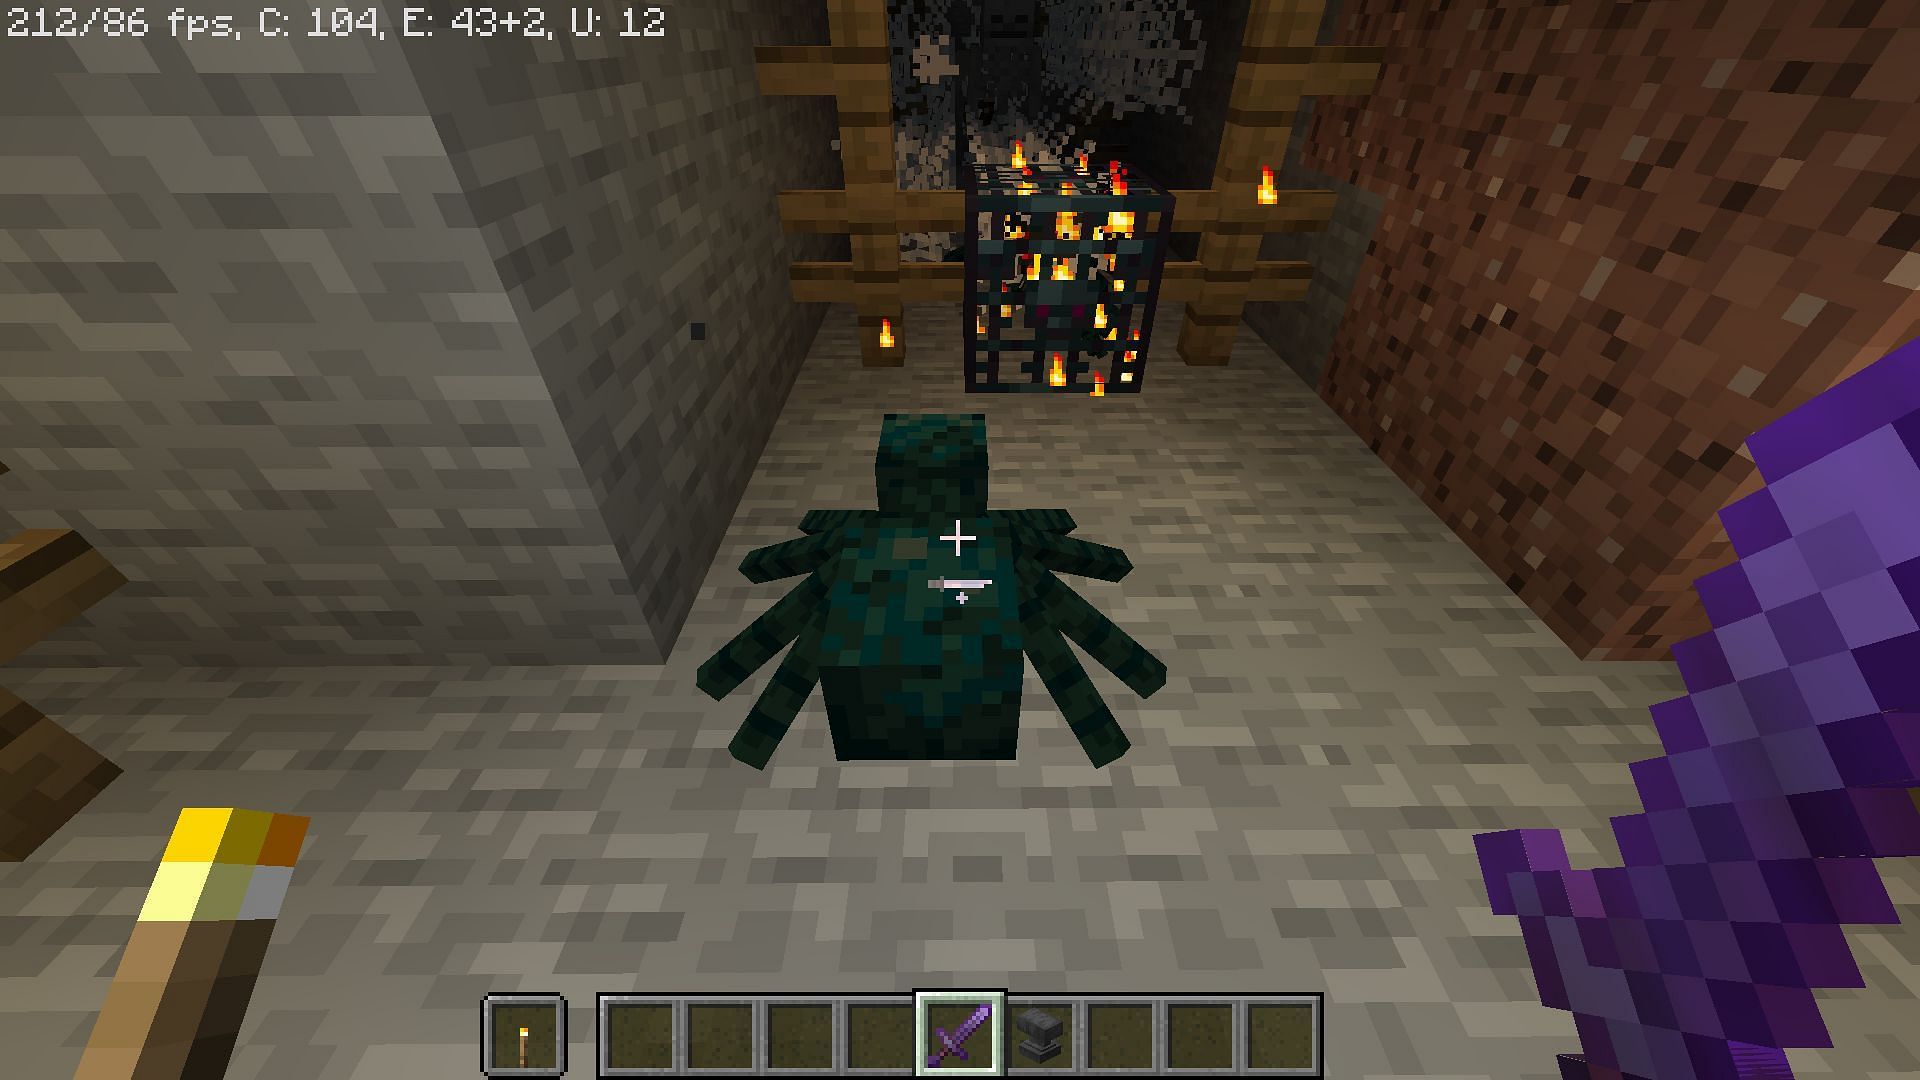 It only works with arthropod mobs like spiders, bees, endermite, and silverfish (Image via Minecraft)